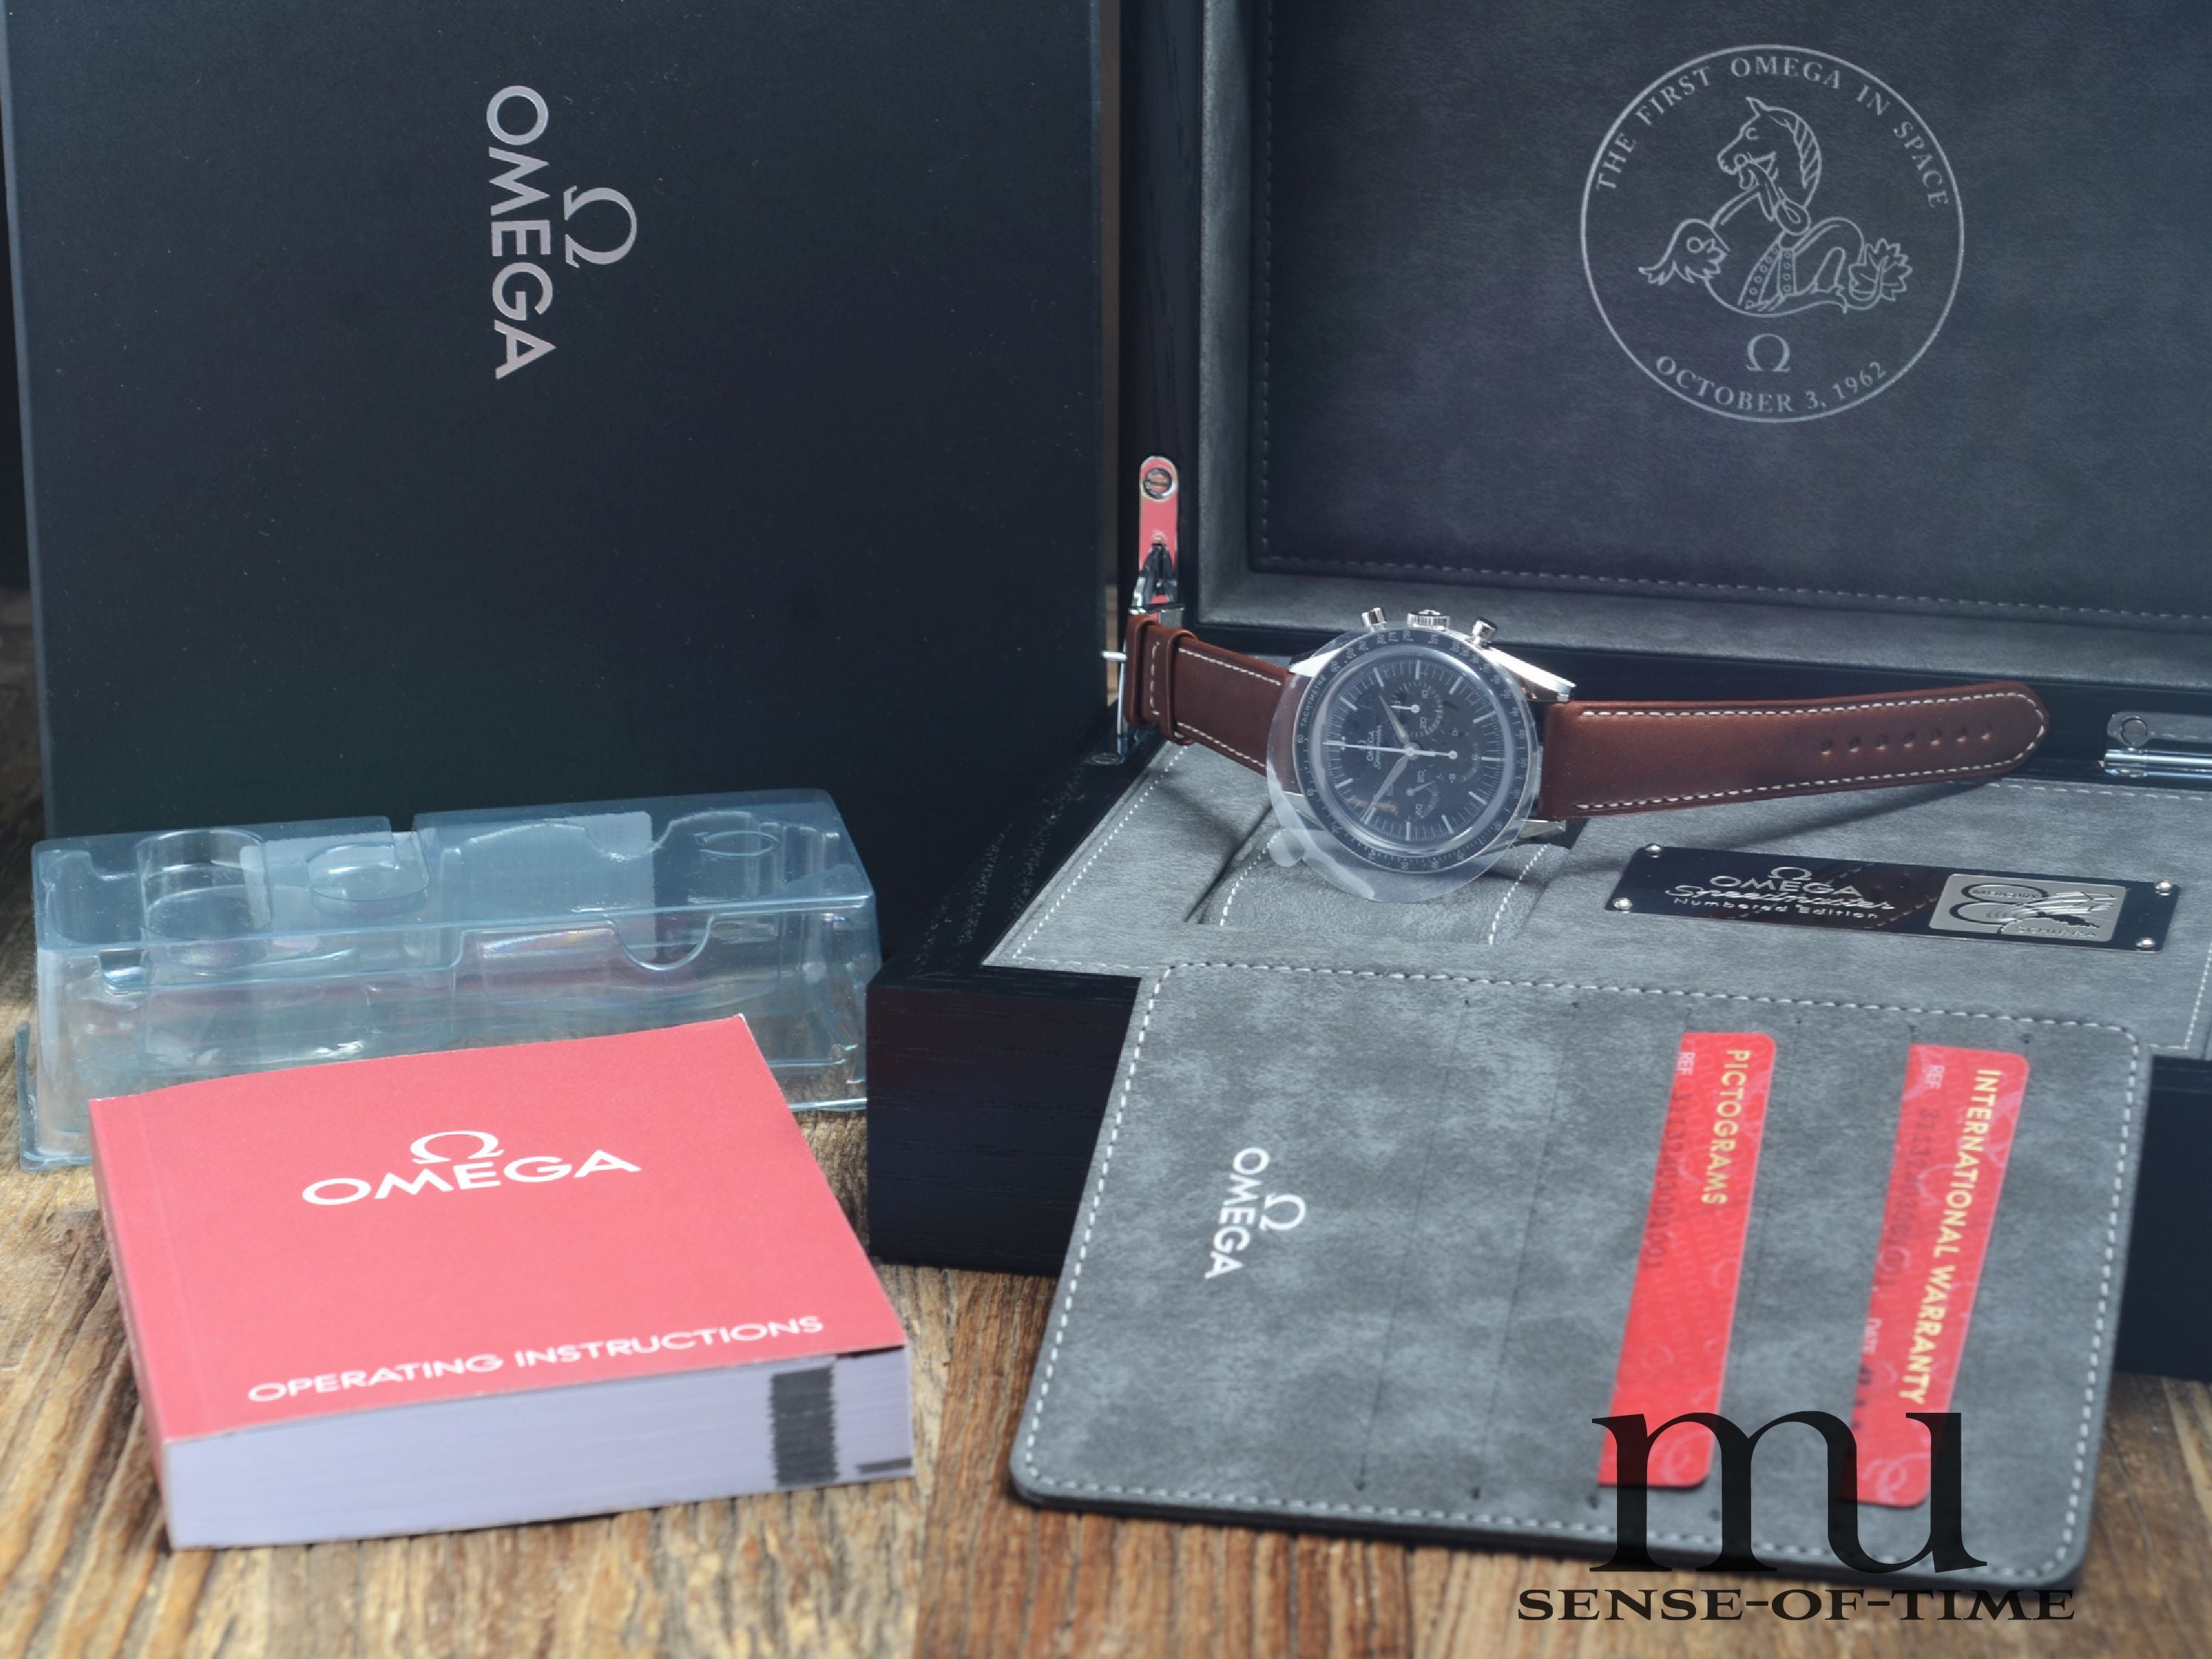 Omega Speedmaster First Omega In Space (FOIS), discontinued, neu aus 2021